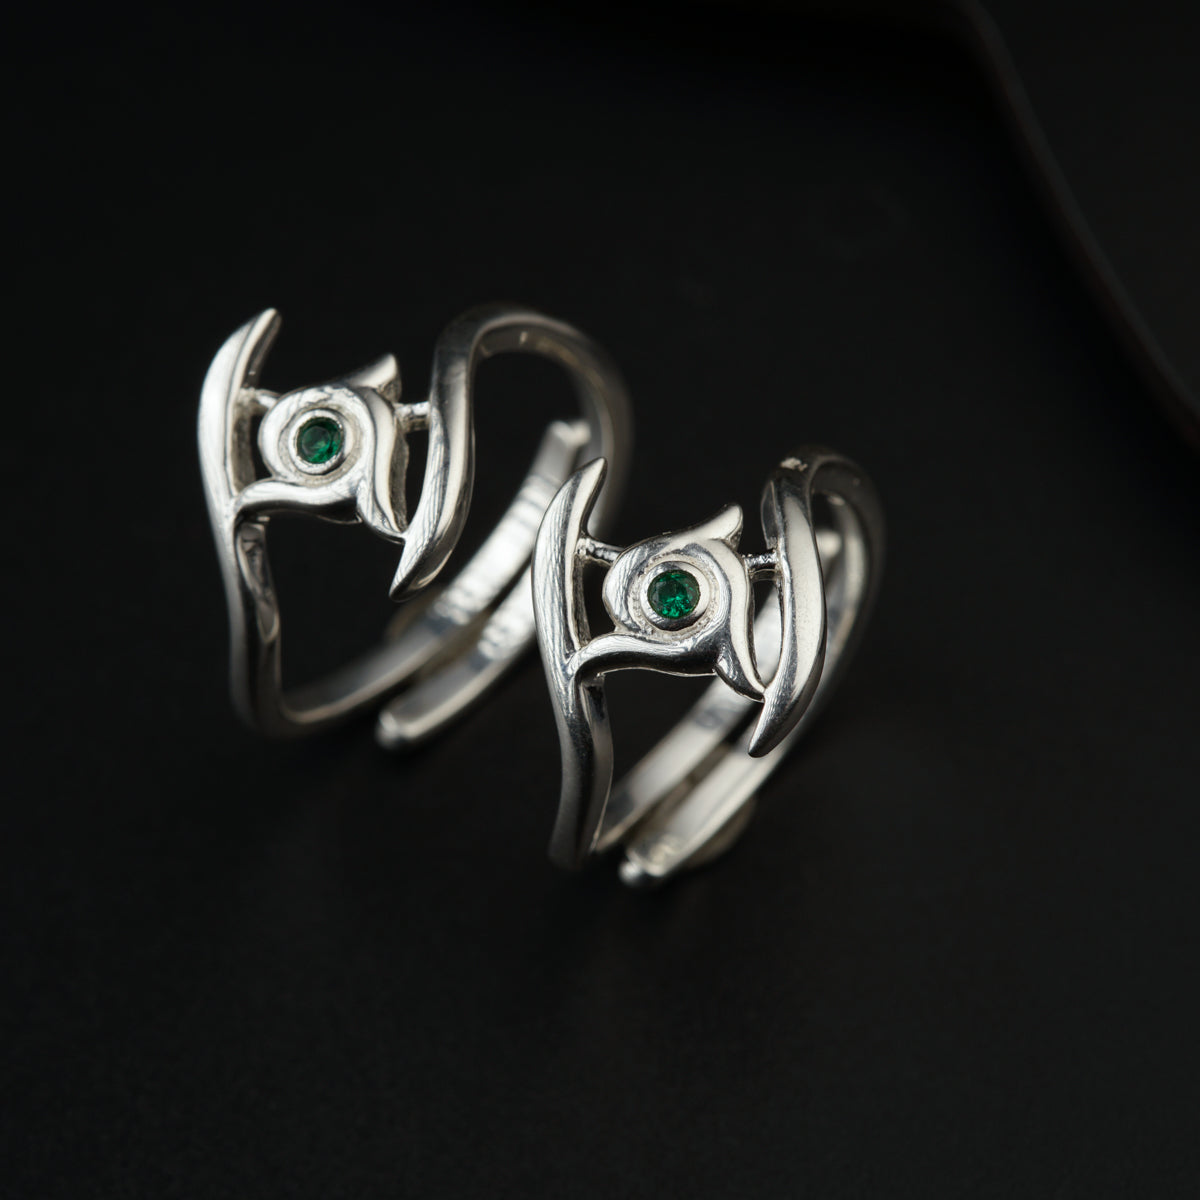 a pair of silver rings with green stones